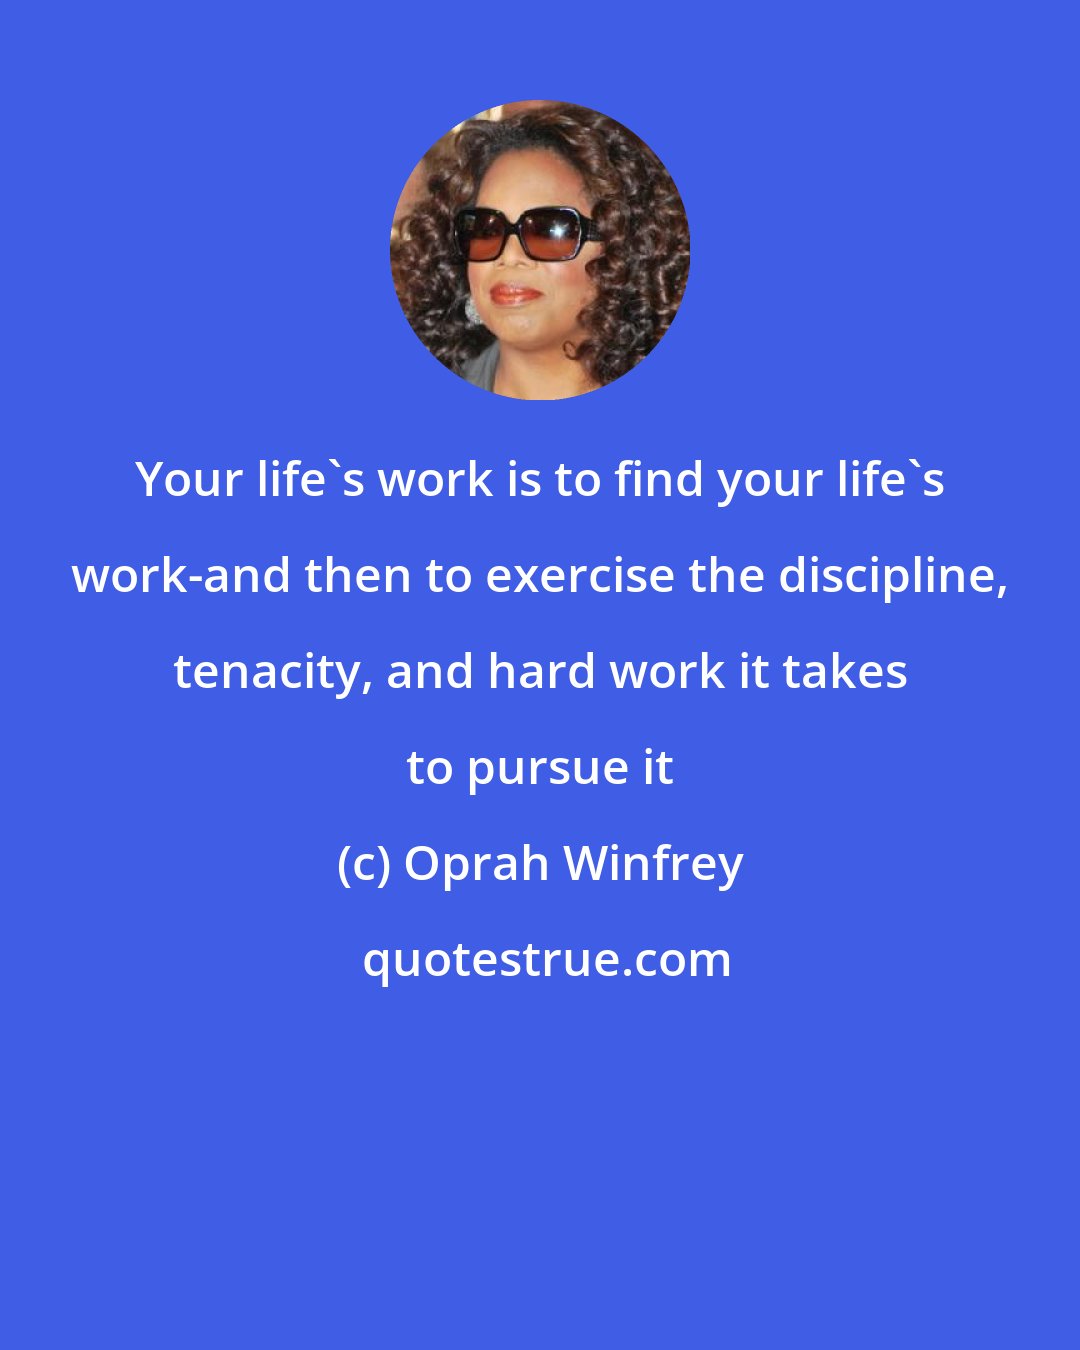 Oprah Winfrey: Your life's work is to find your life's work-and then to exercise the discipline, tenacity, and hard work it takes to pursue it